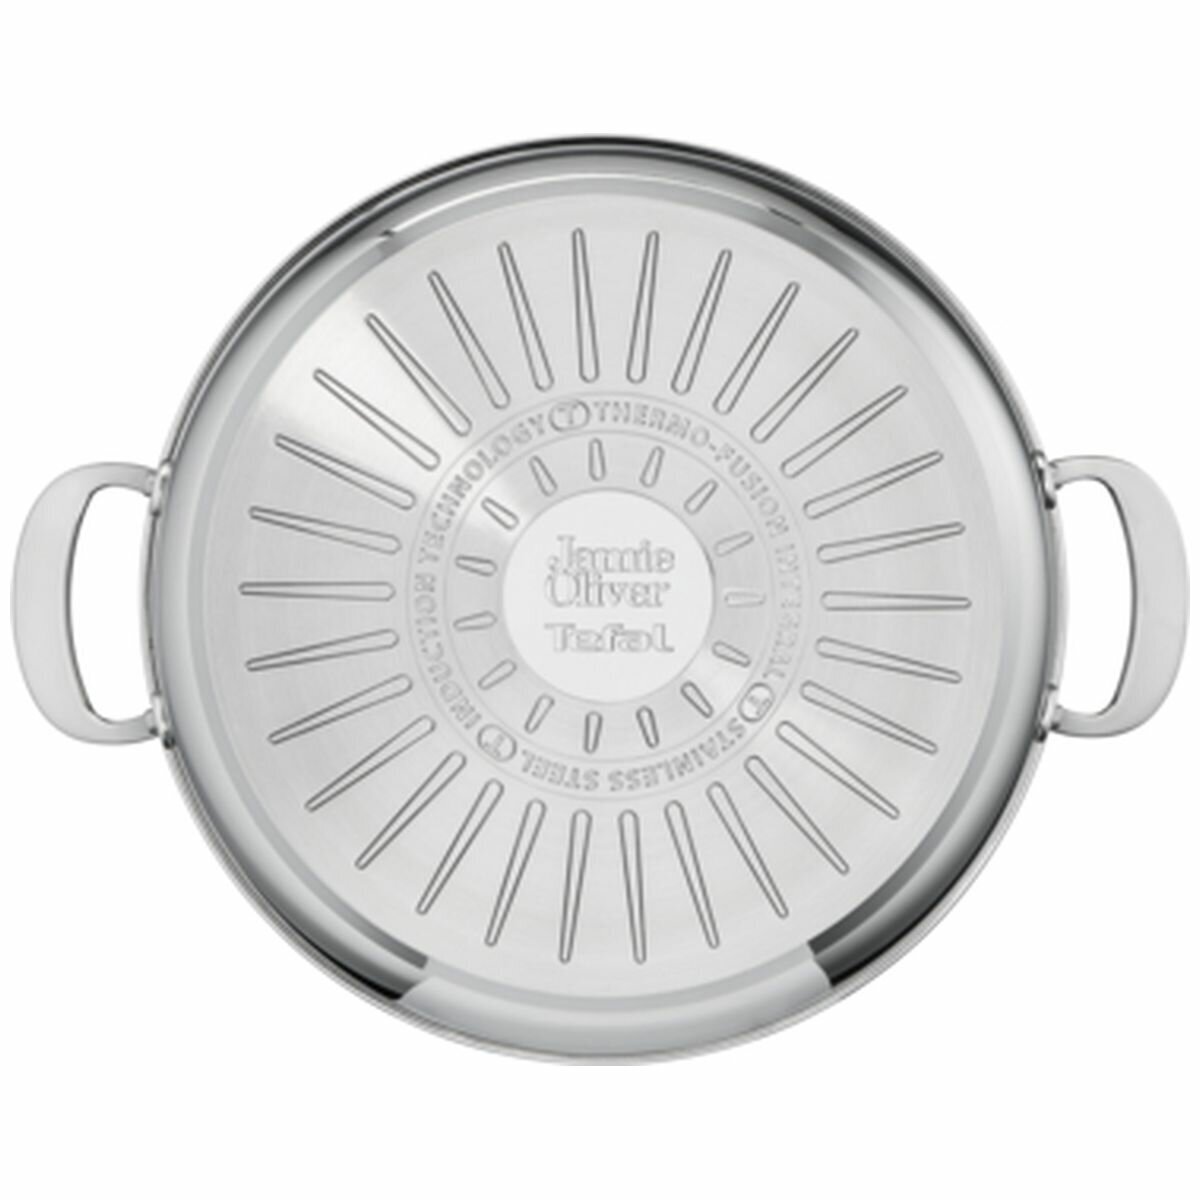 Tefal Jamie Oliver Cook's Classic Induction Non-Stick Shallow Pan E3069034